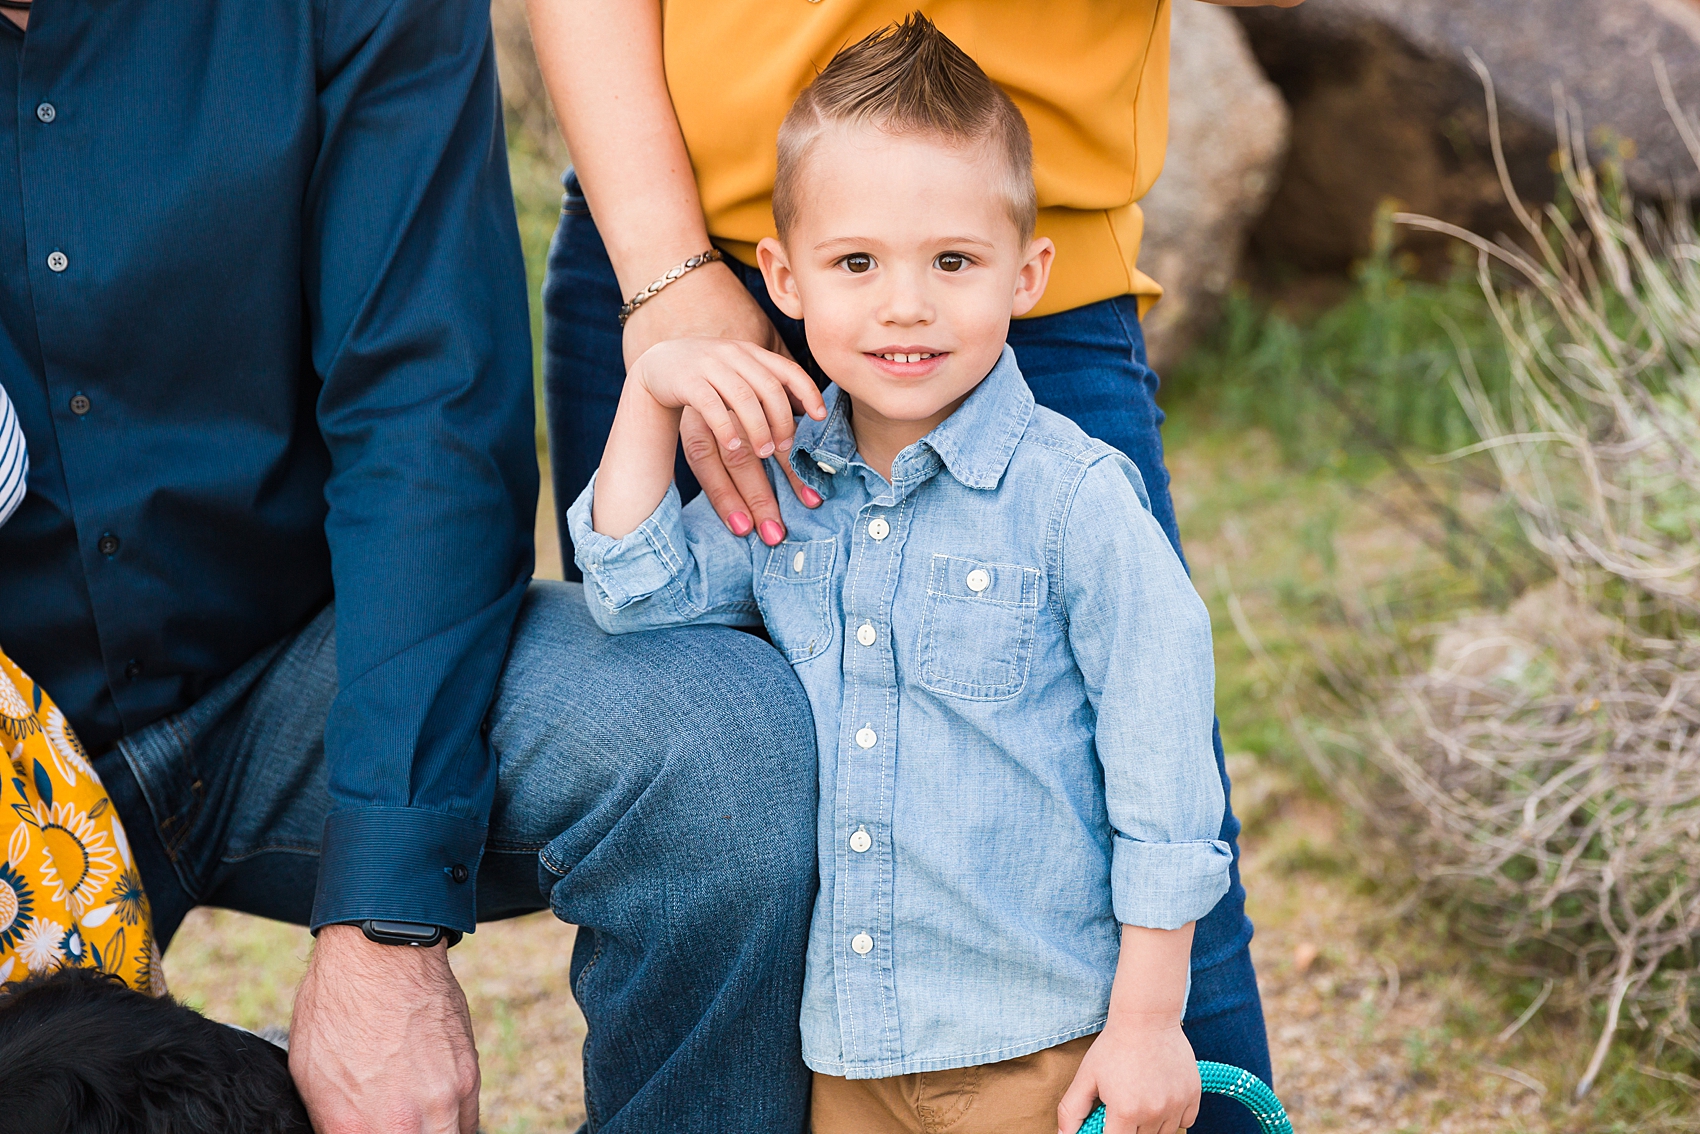 Leah Hope Photography | Scottsdale Phoenix Arizona Photographer | Desert Landscape Boulders | Family Pictures | Family Lifestyle Dog Photos | What to Wear | Family Poses